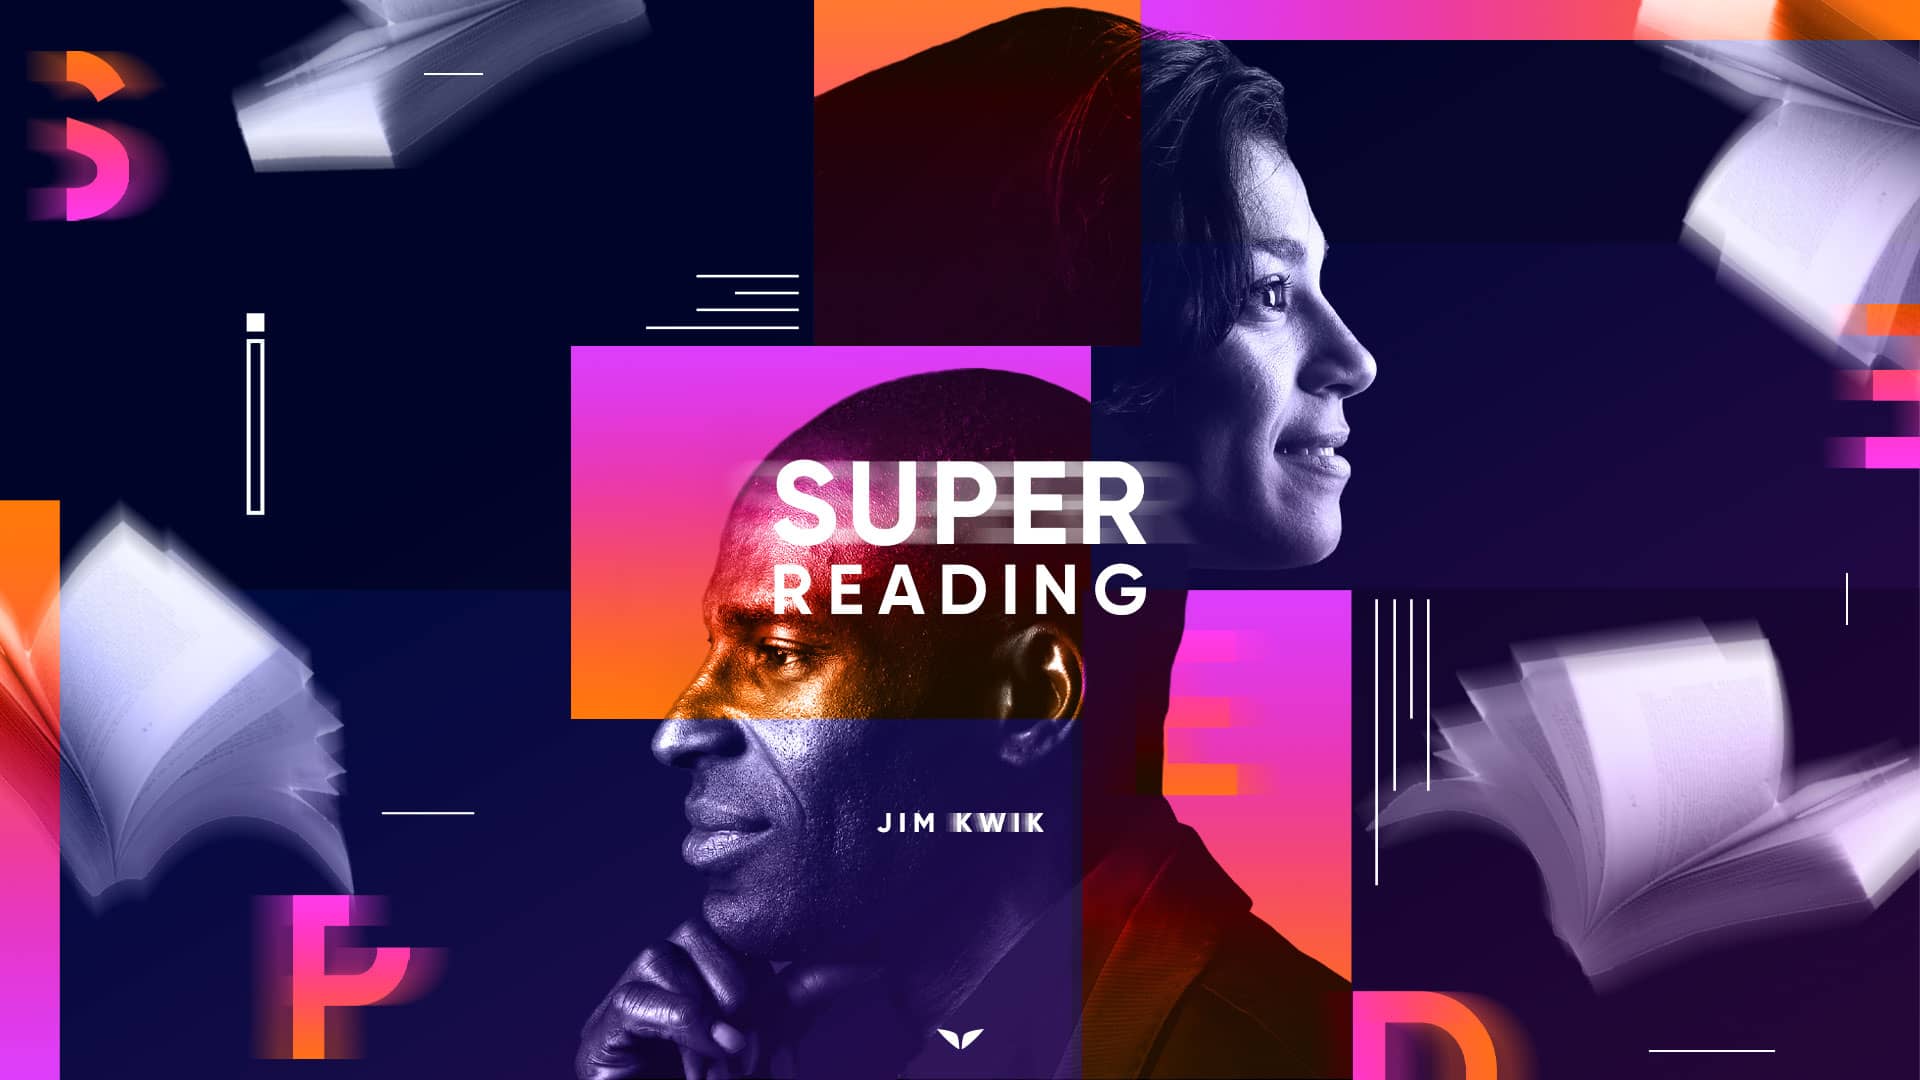 The Super Reading Quest from Jim Kwik is Available Now On Mindvalley